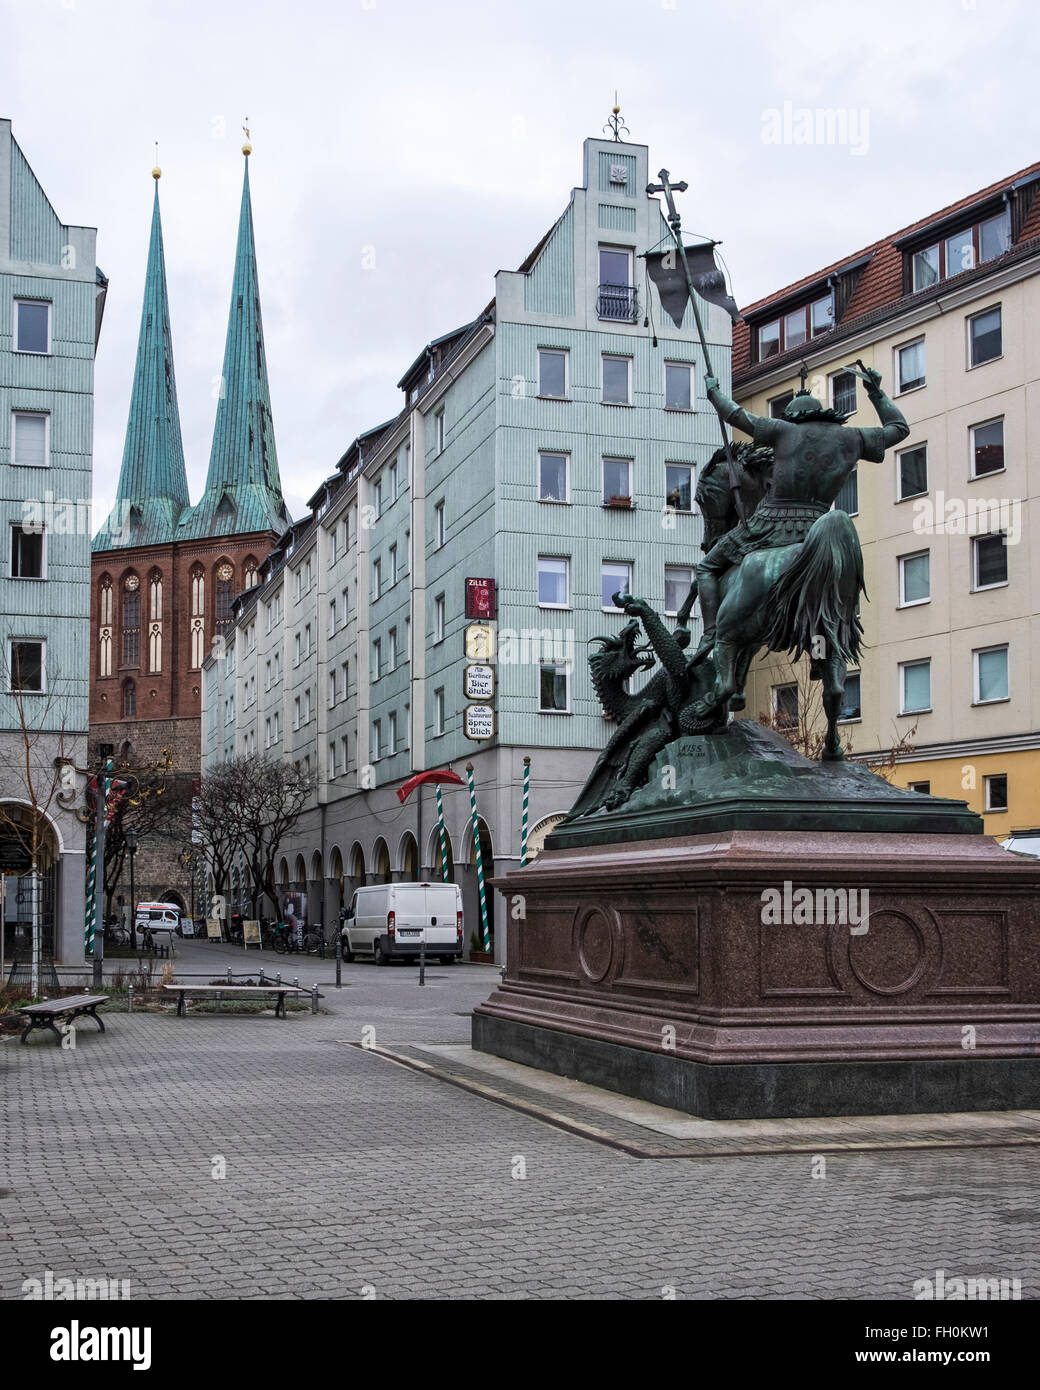 Nikolaiviertel, Berlin - Historic old town with St Nicholas church & bronze sculpture of Saint George slaying a dragon Stock Photo